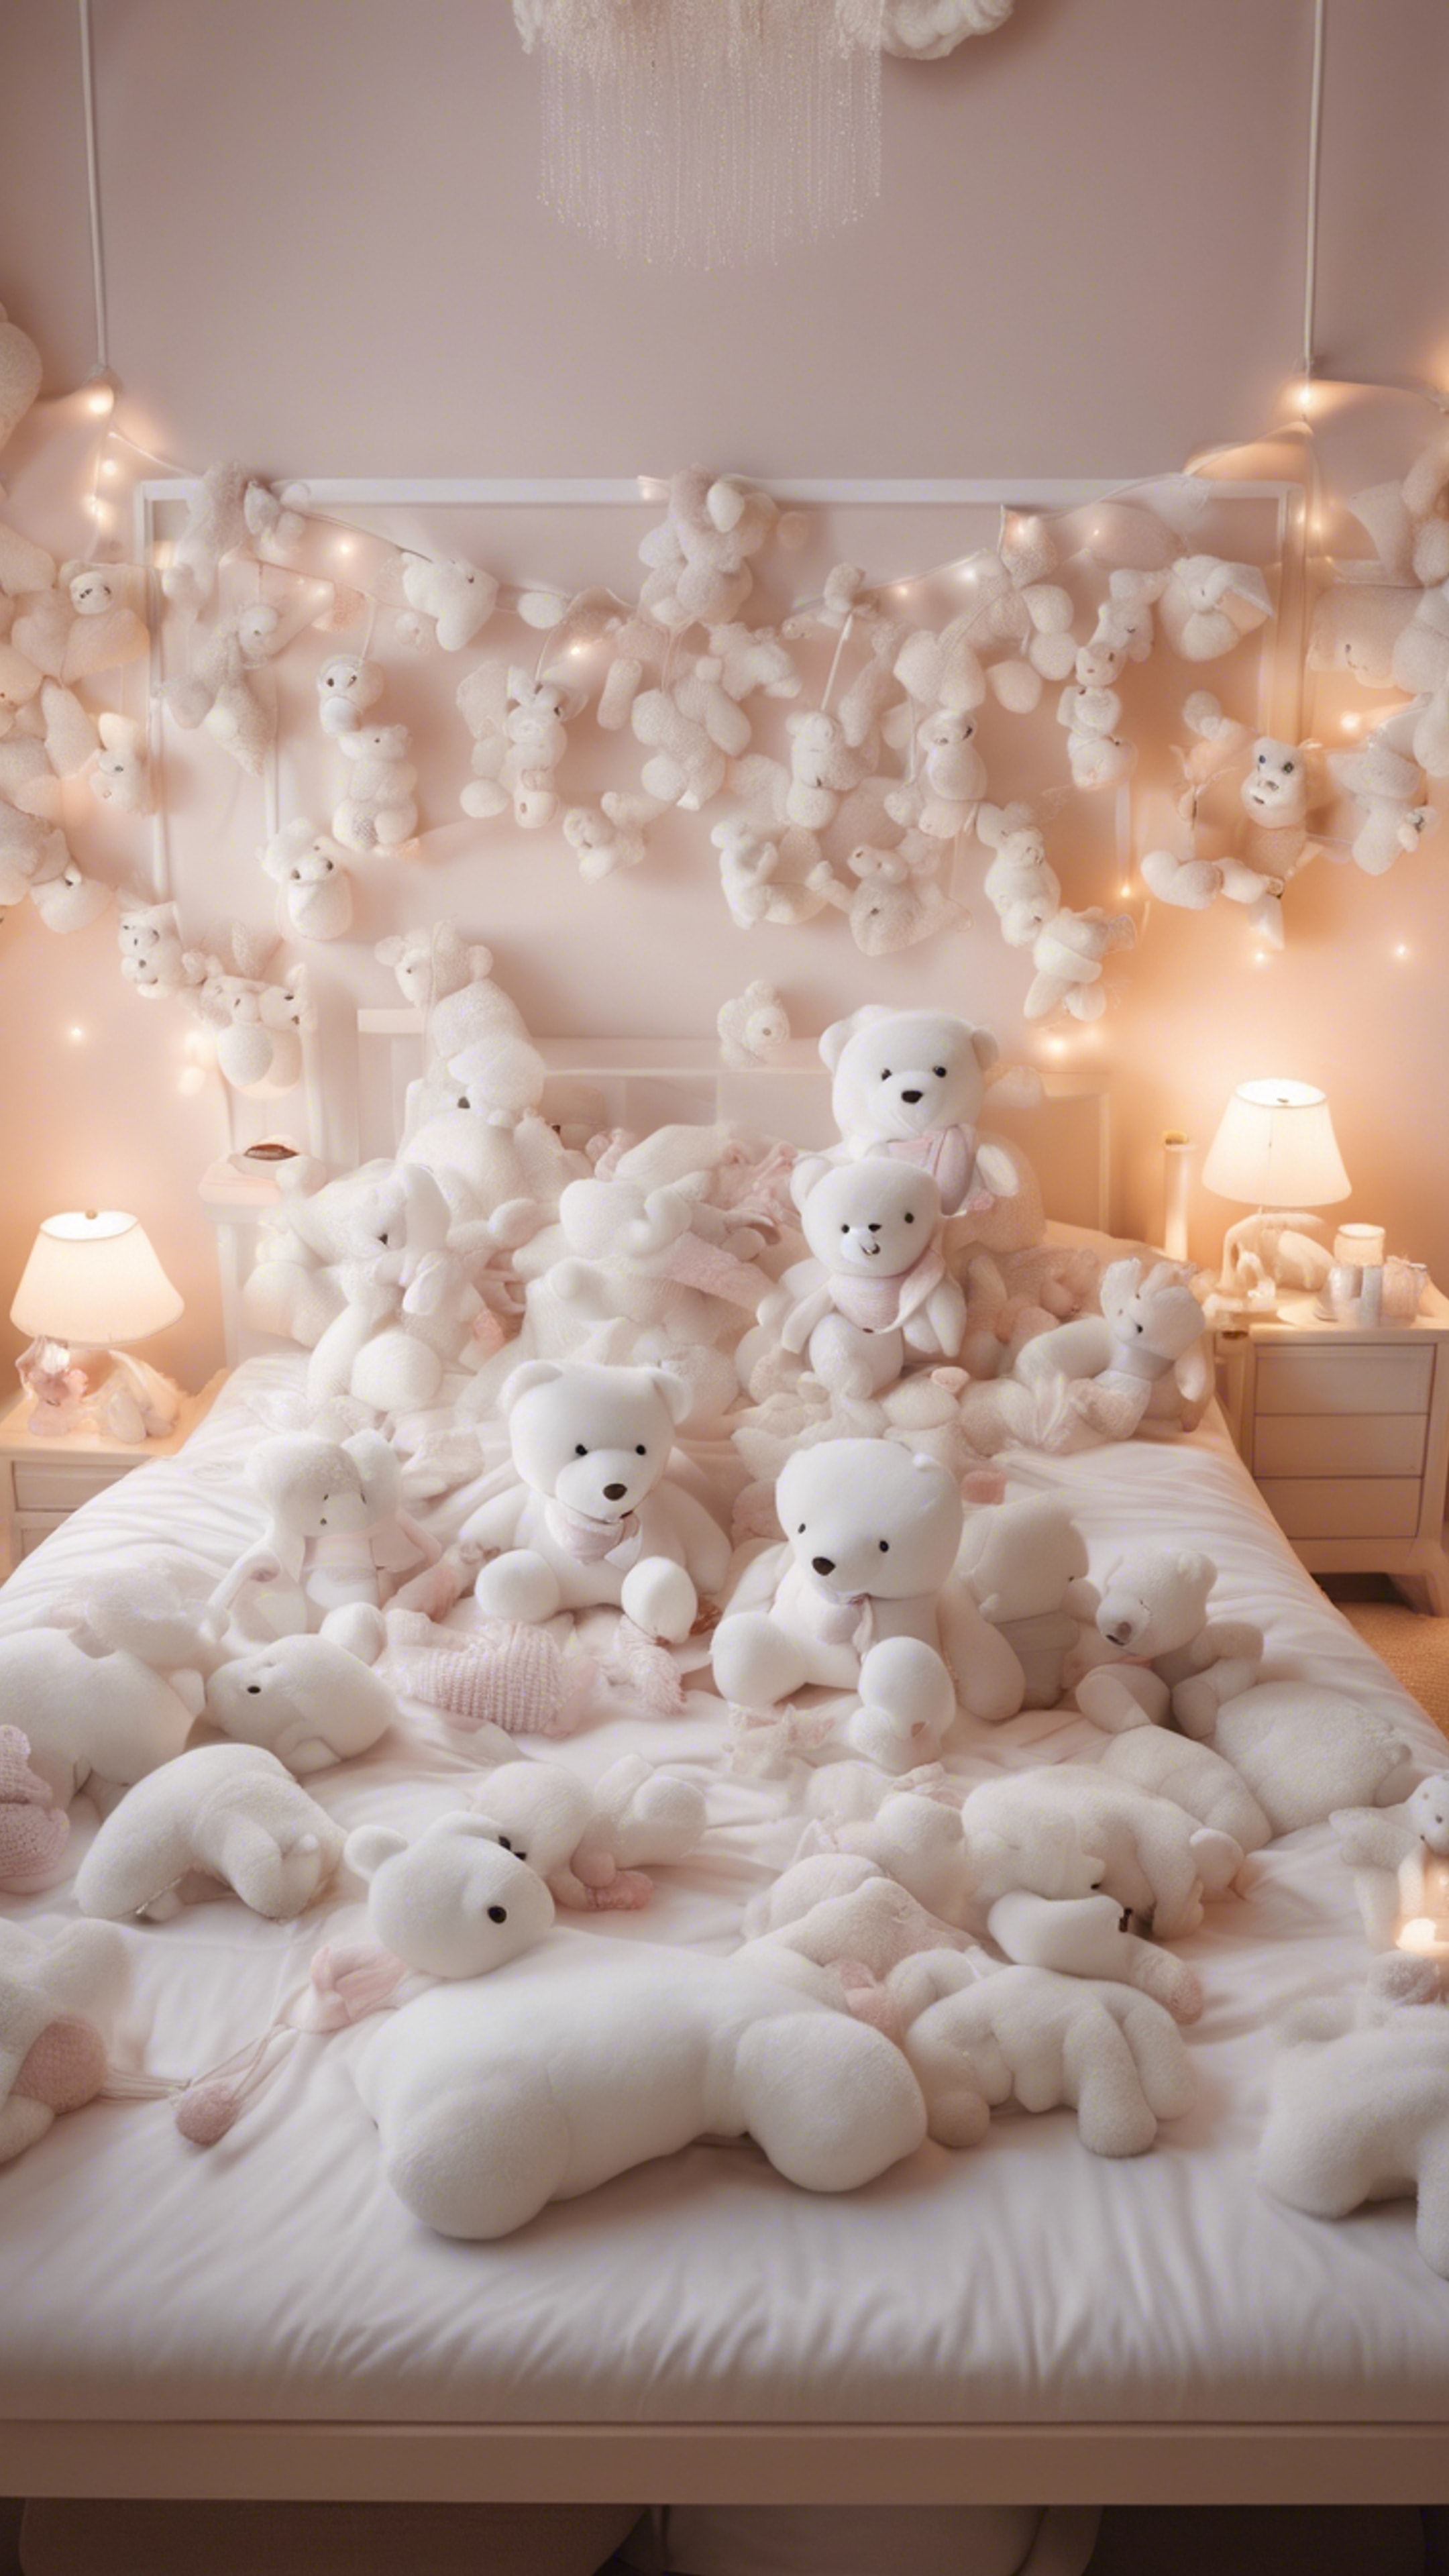 A kawaii style decorated bedroom, filled with white teddies and cushions. Tapéta[9112291410ac42cead00]